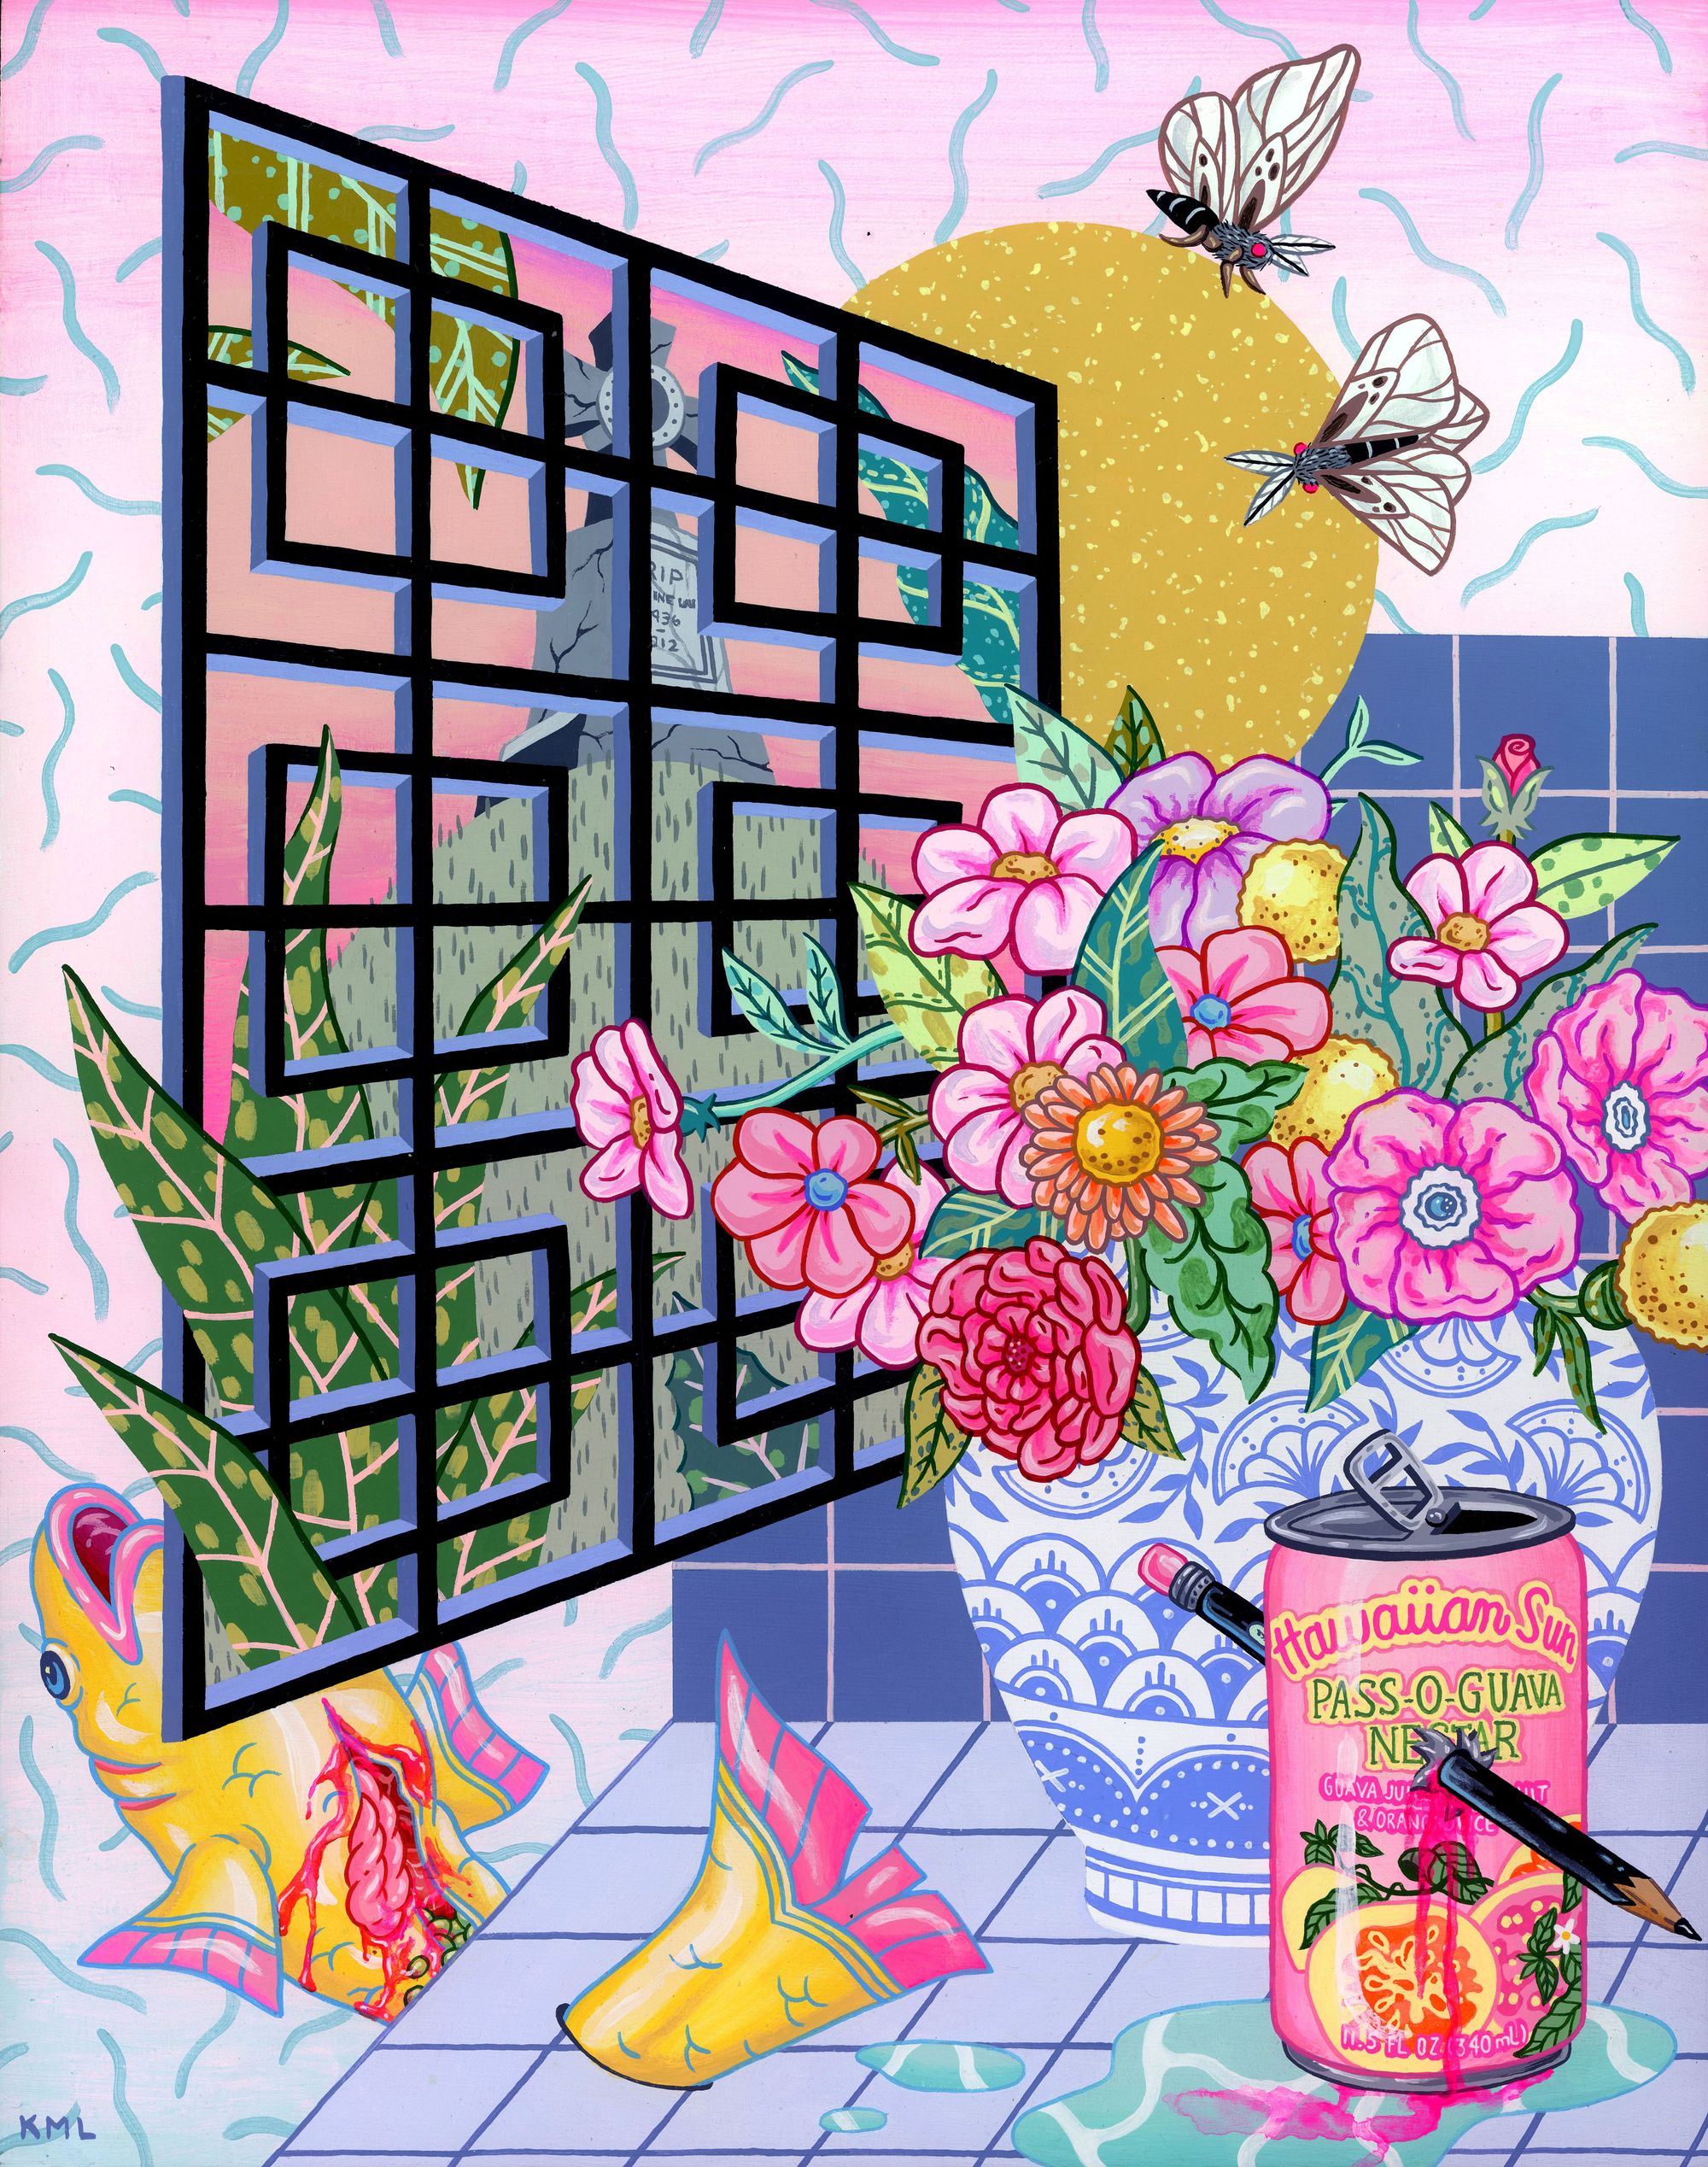 Painter and illustrator Kristen Liu-Wong's painting title Still Life With Death depicts a ming vase filled with an assortment of pink flowers, a gutted fish underneath an Asian screen, and two moths. 